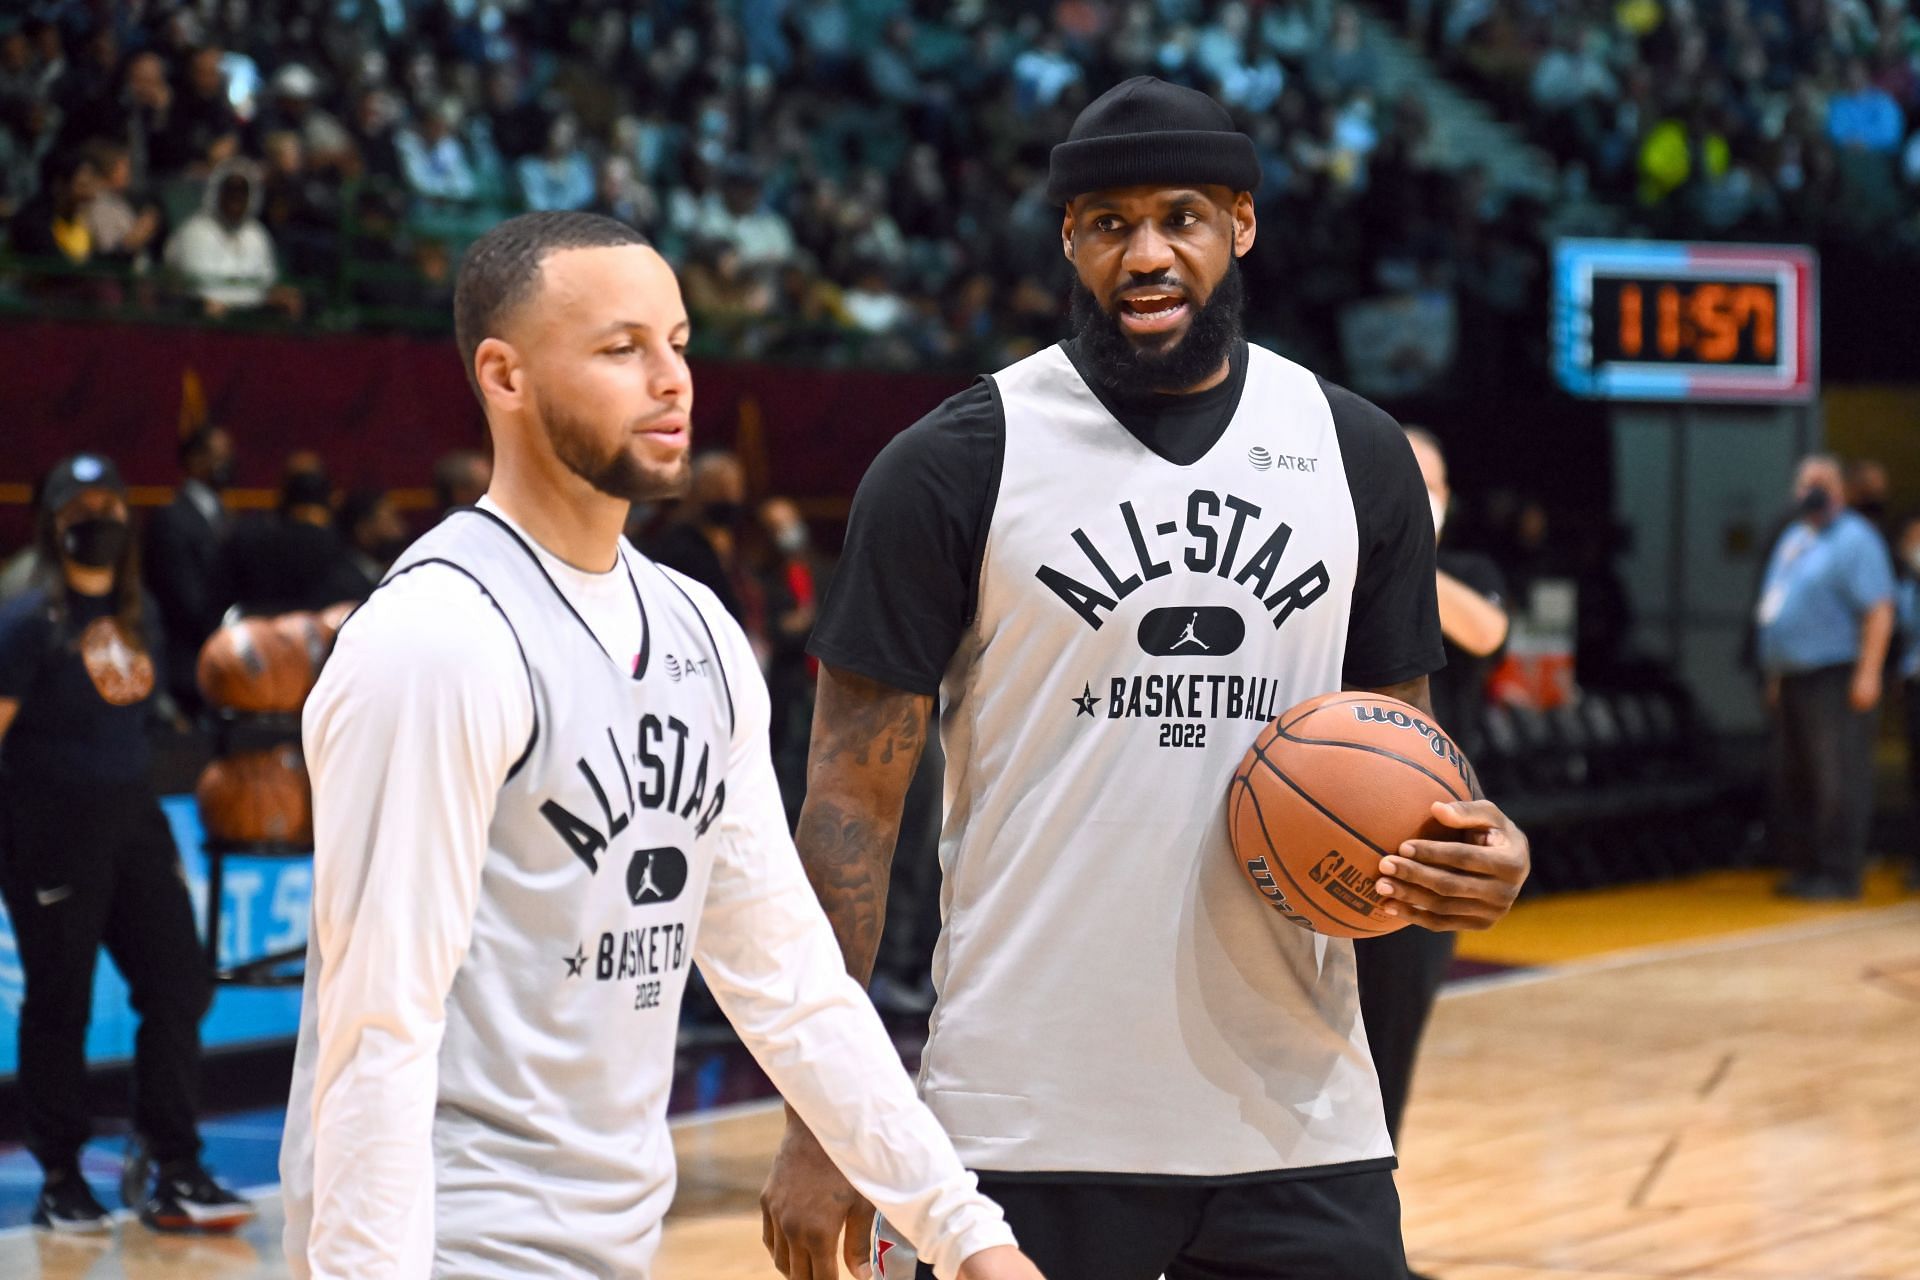 Steph Curry and LeBron James at the 2022 NBA All-Star - Practice and Media Availability